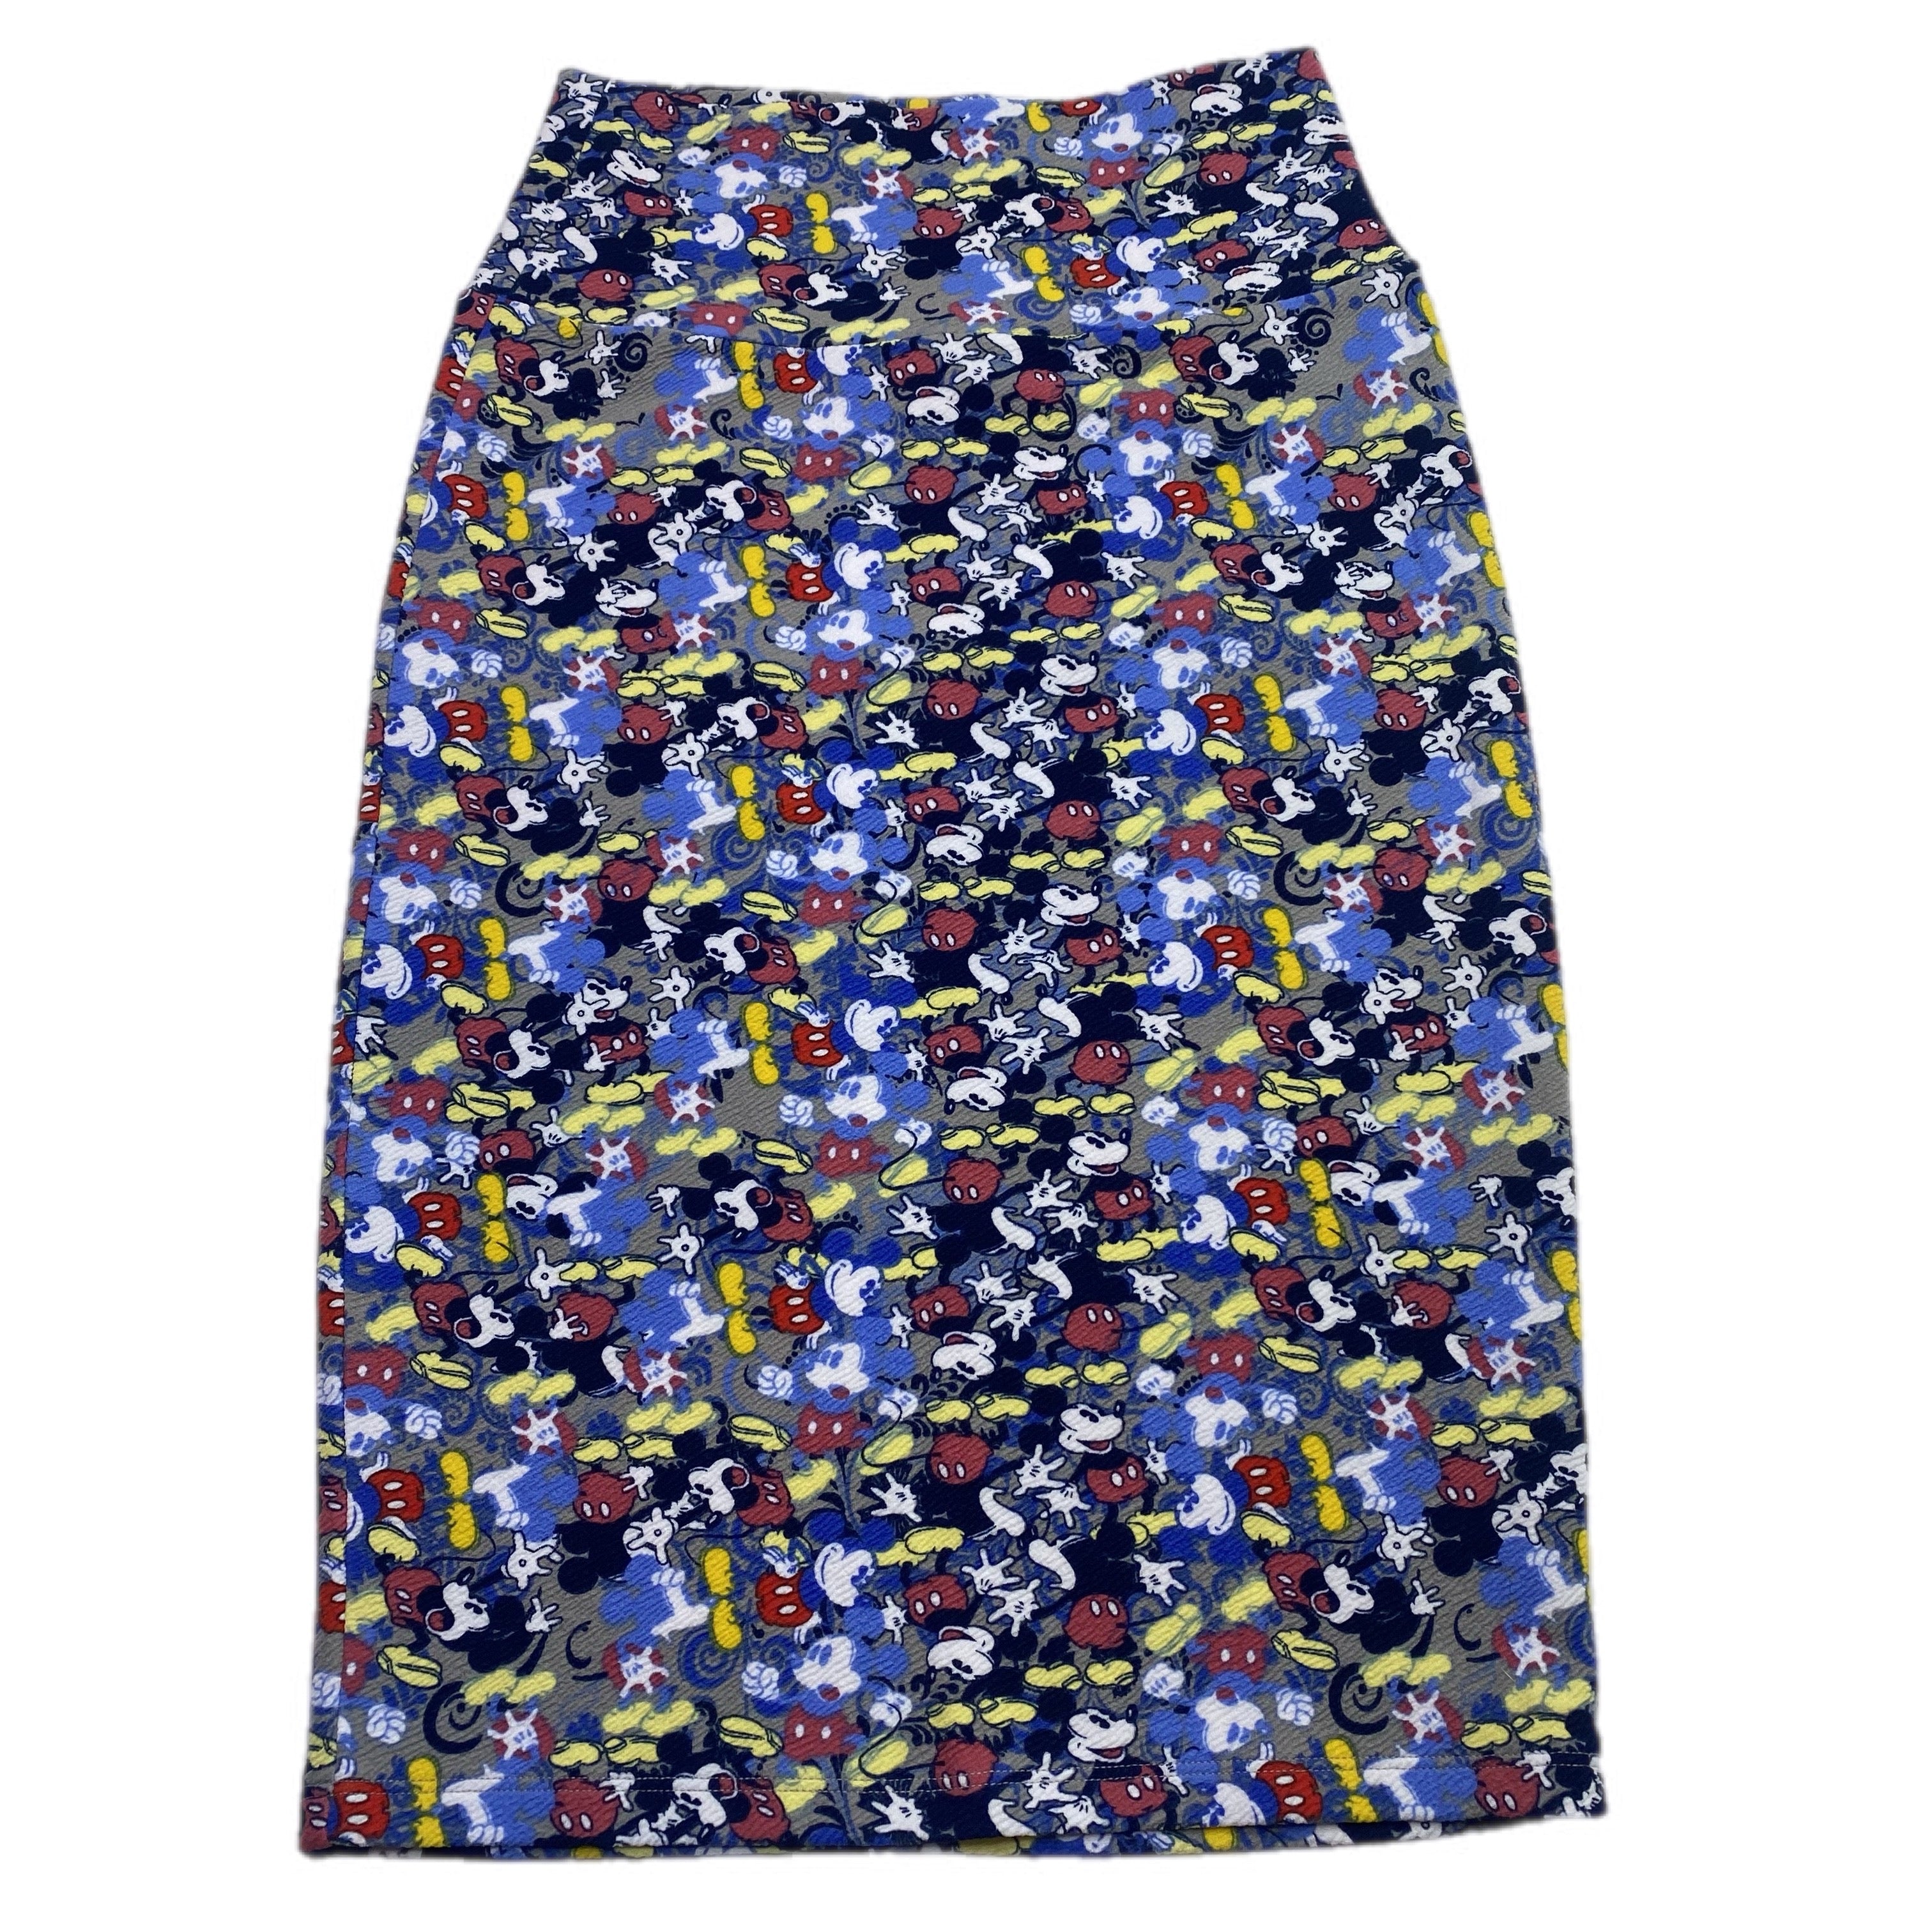 DISNEY CASSIE PENCIL SKIRT - MICKEY MOUSE